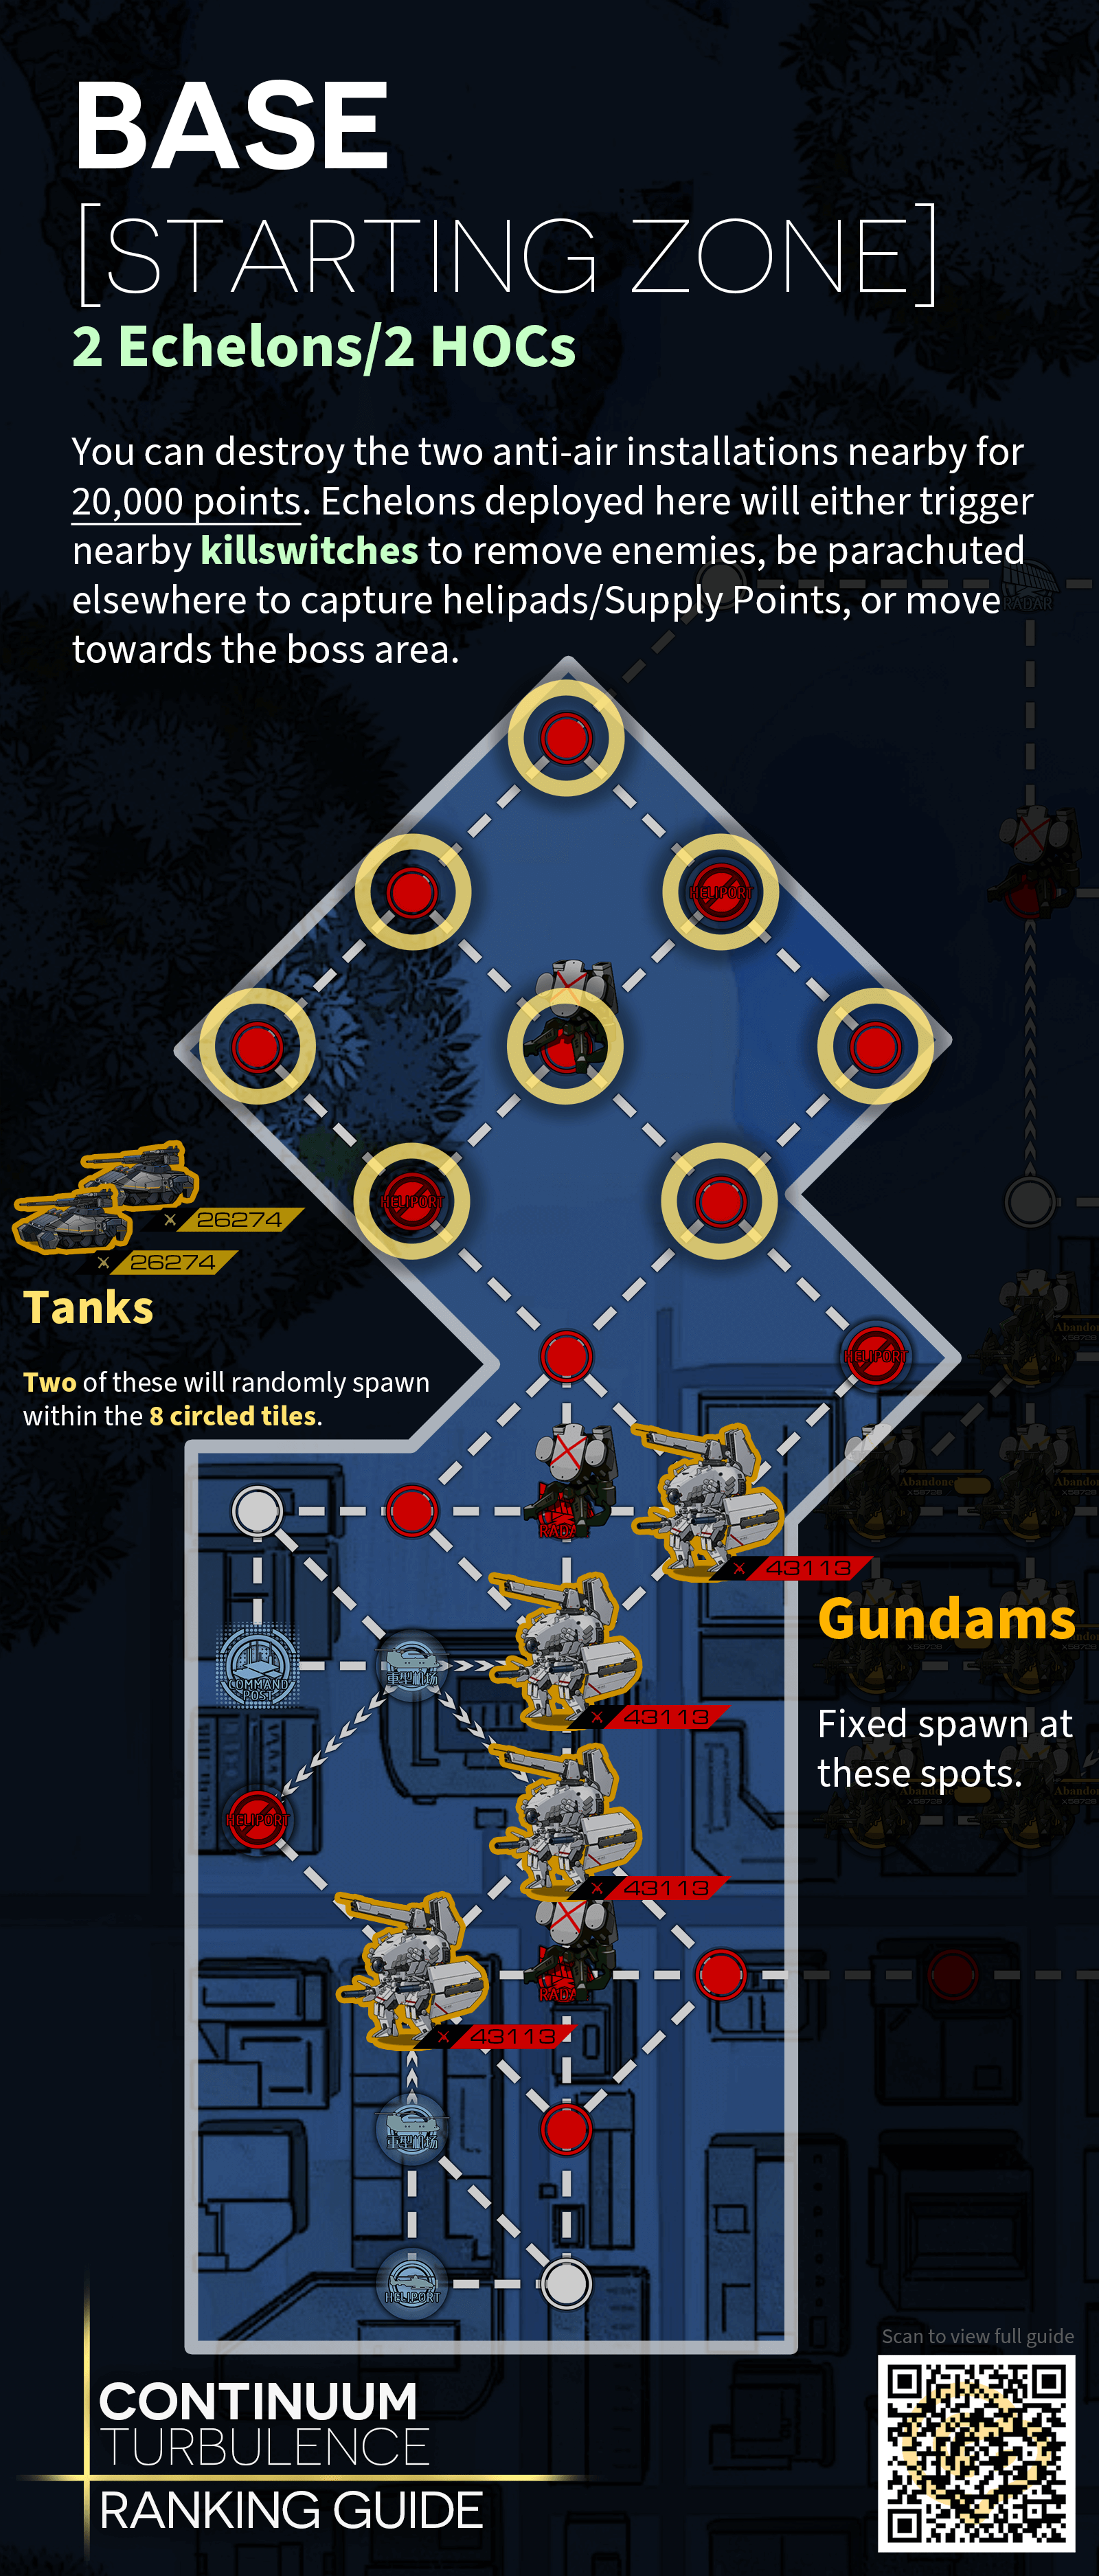 Infographic giving a simplified overview of the Hurricane Rescue ranking map's HQ area, containing gundams and tanks.